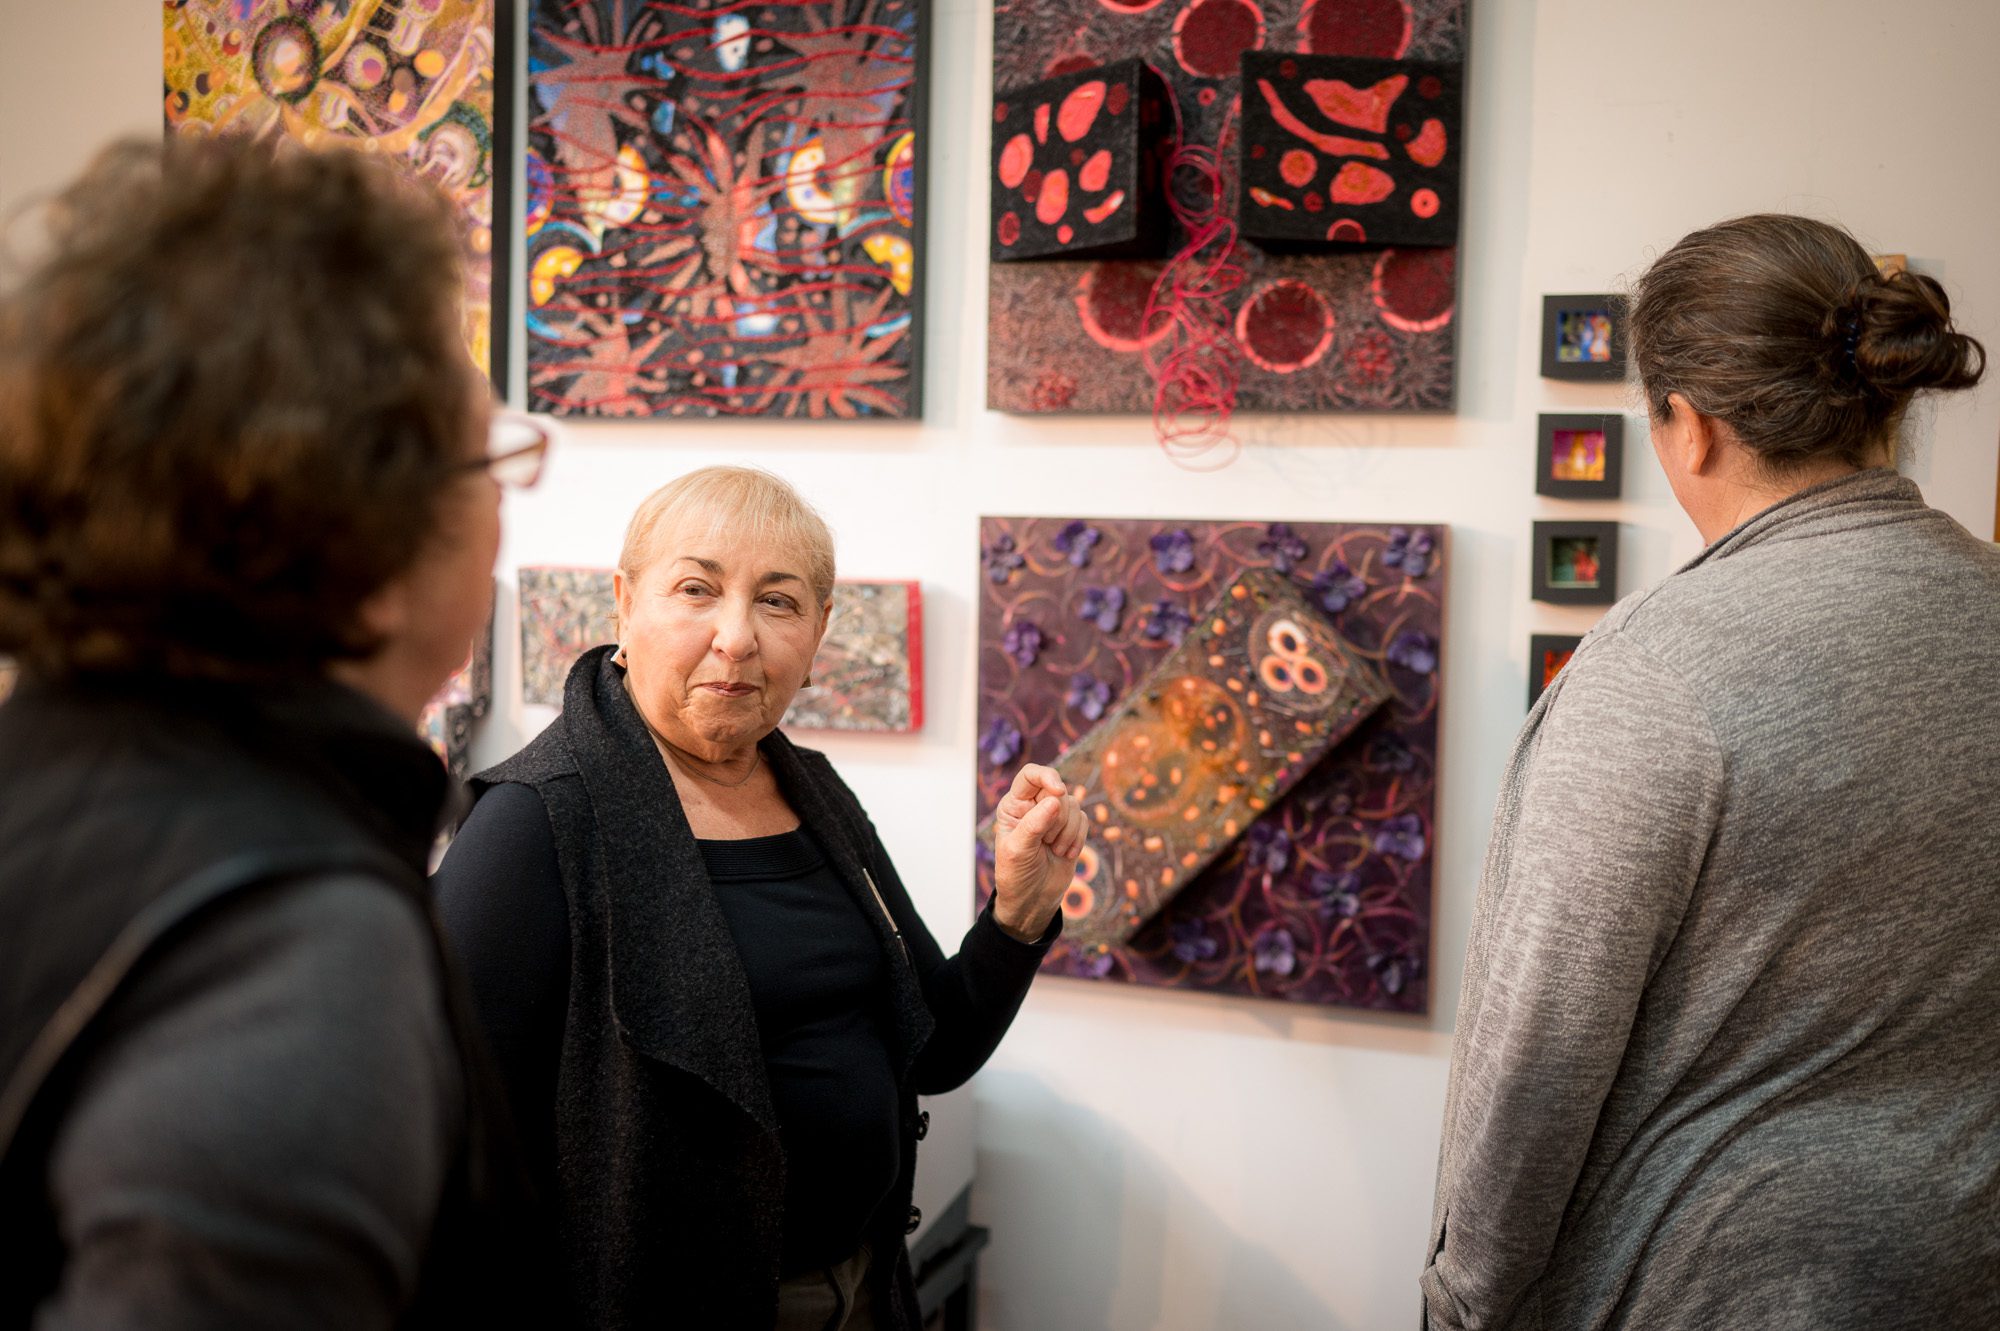 Artist showing her work to visitors